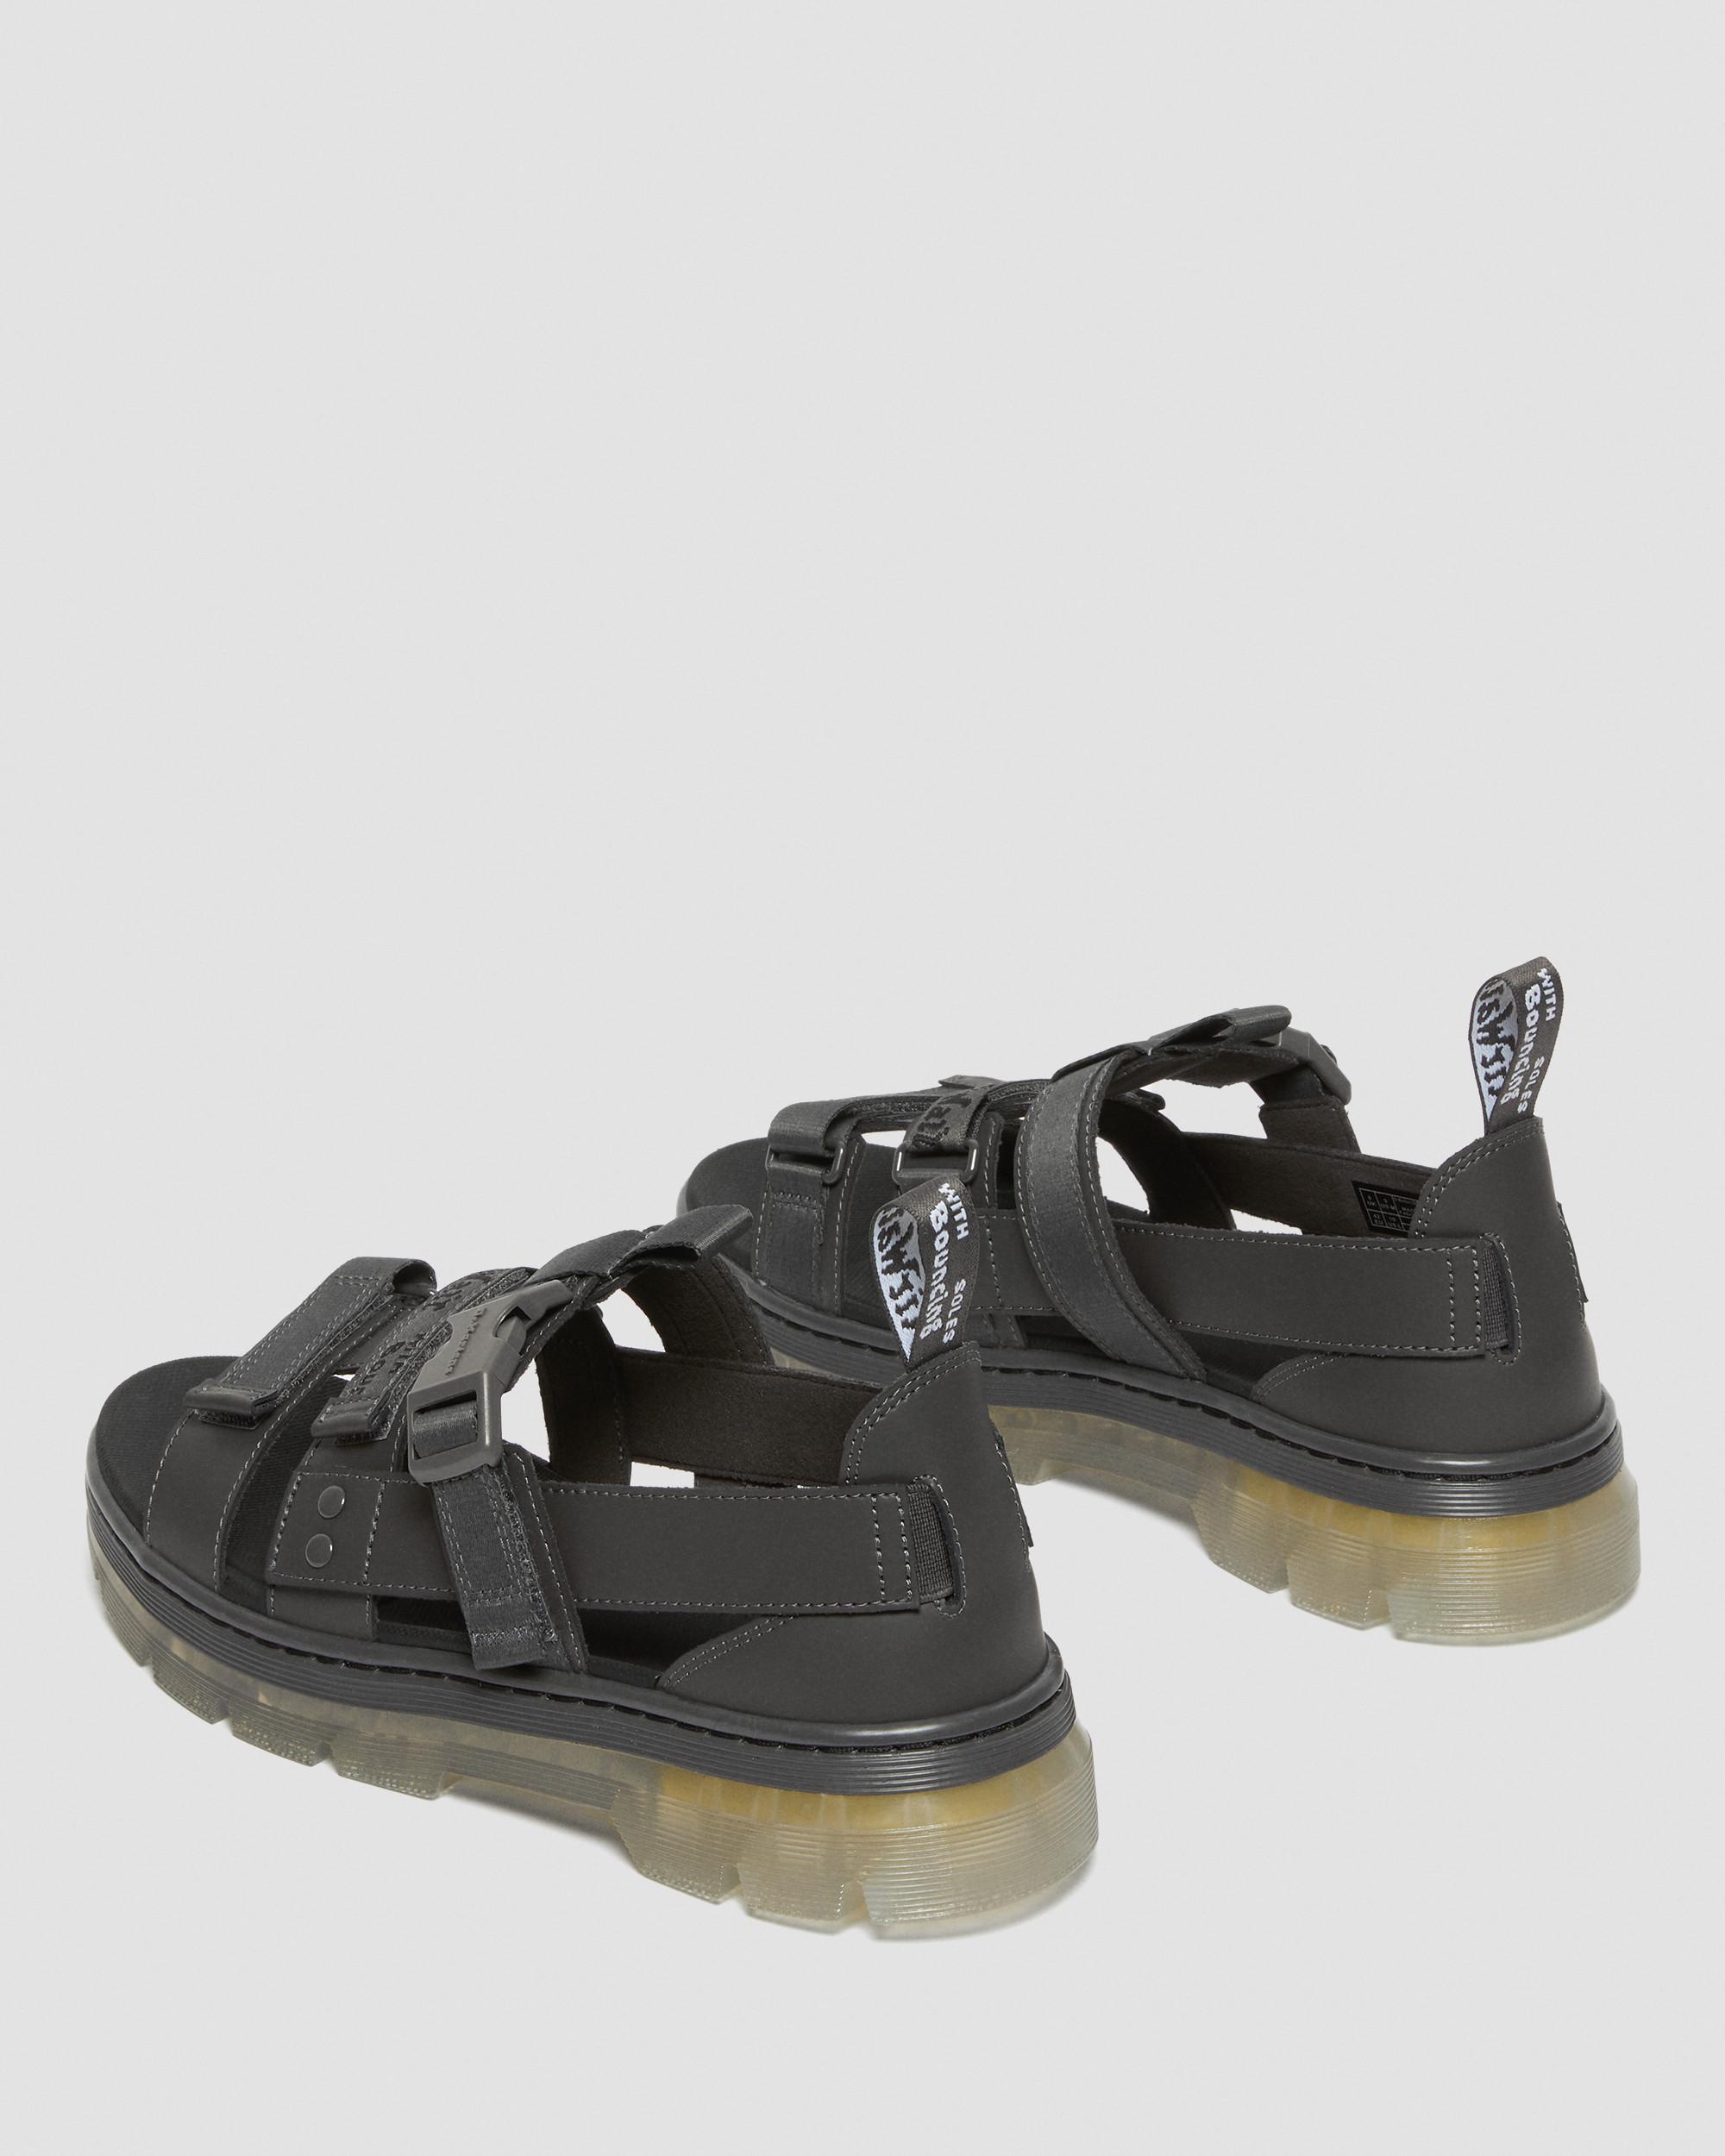 Pearson Iced Casual SandalsPearson Iced Casual Sandals Dr. Martens